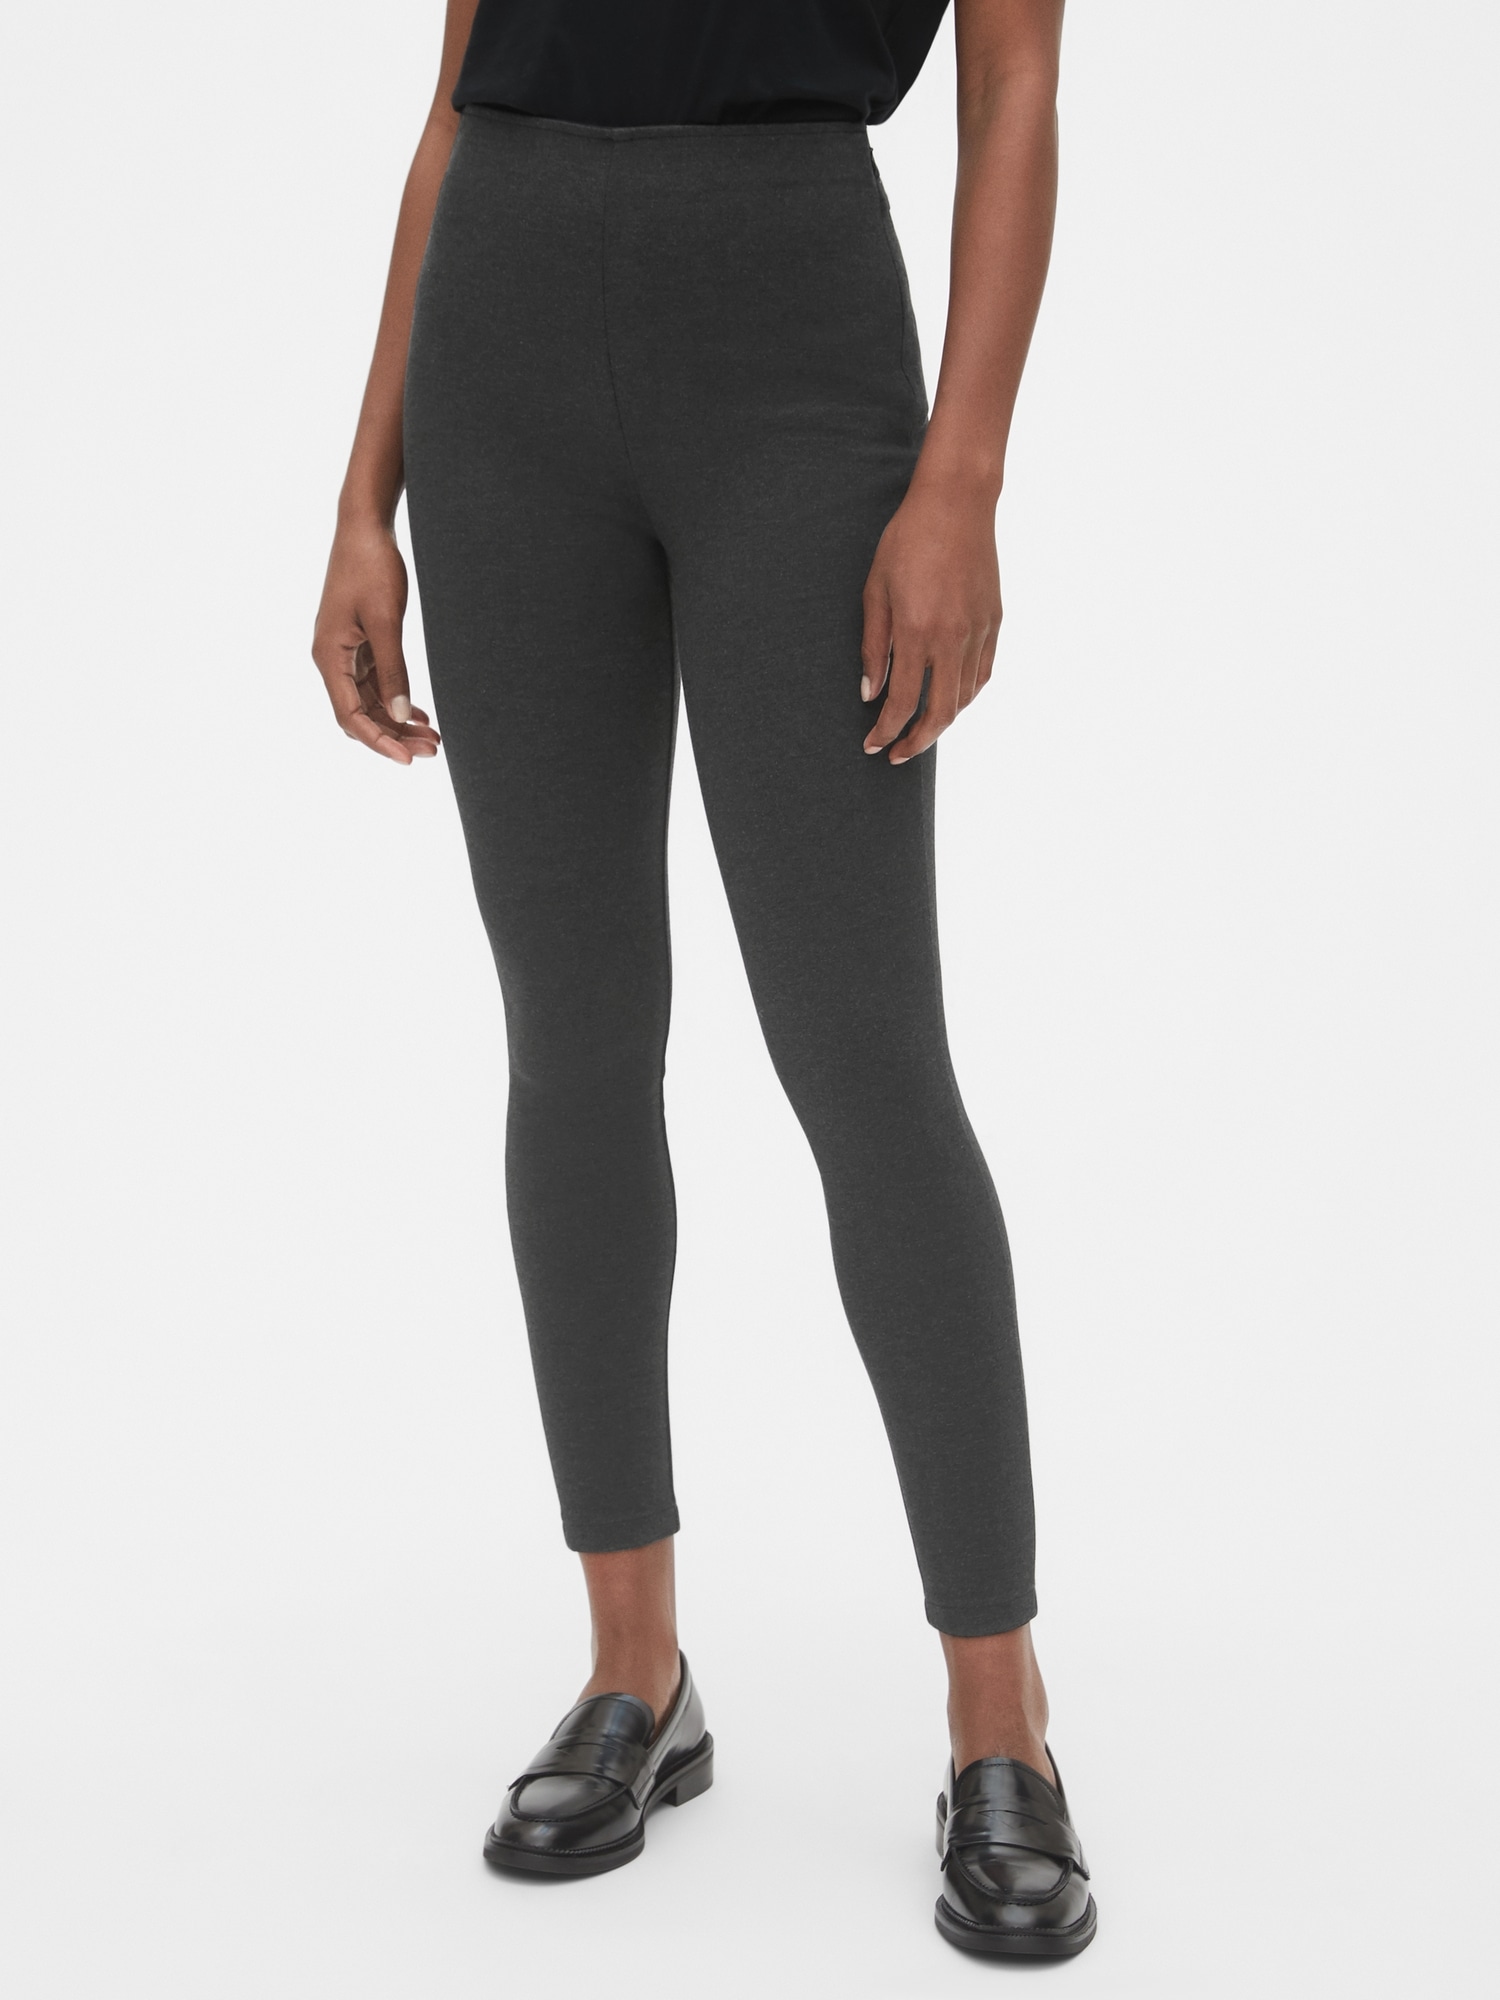 HUE Ponte 7/8 Legging With Side Opening